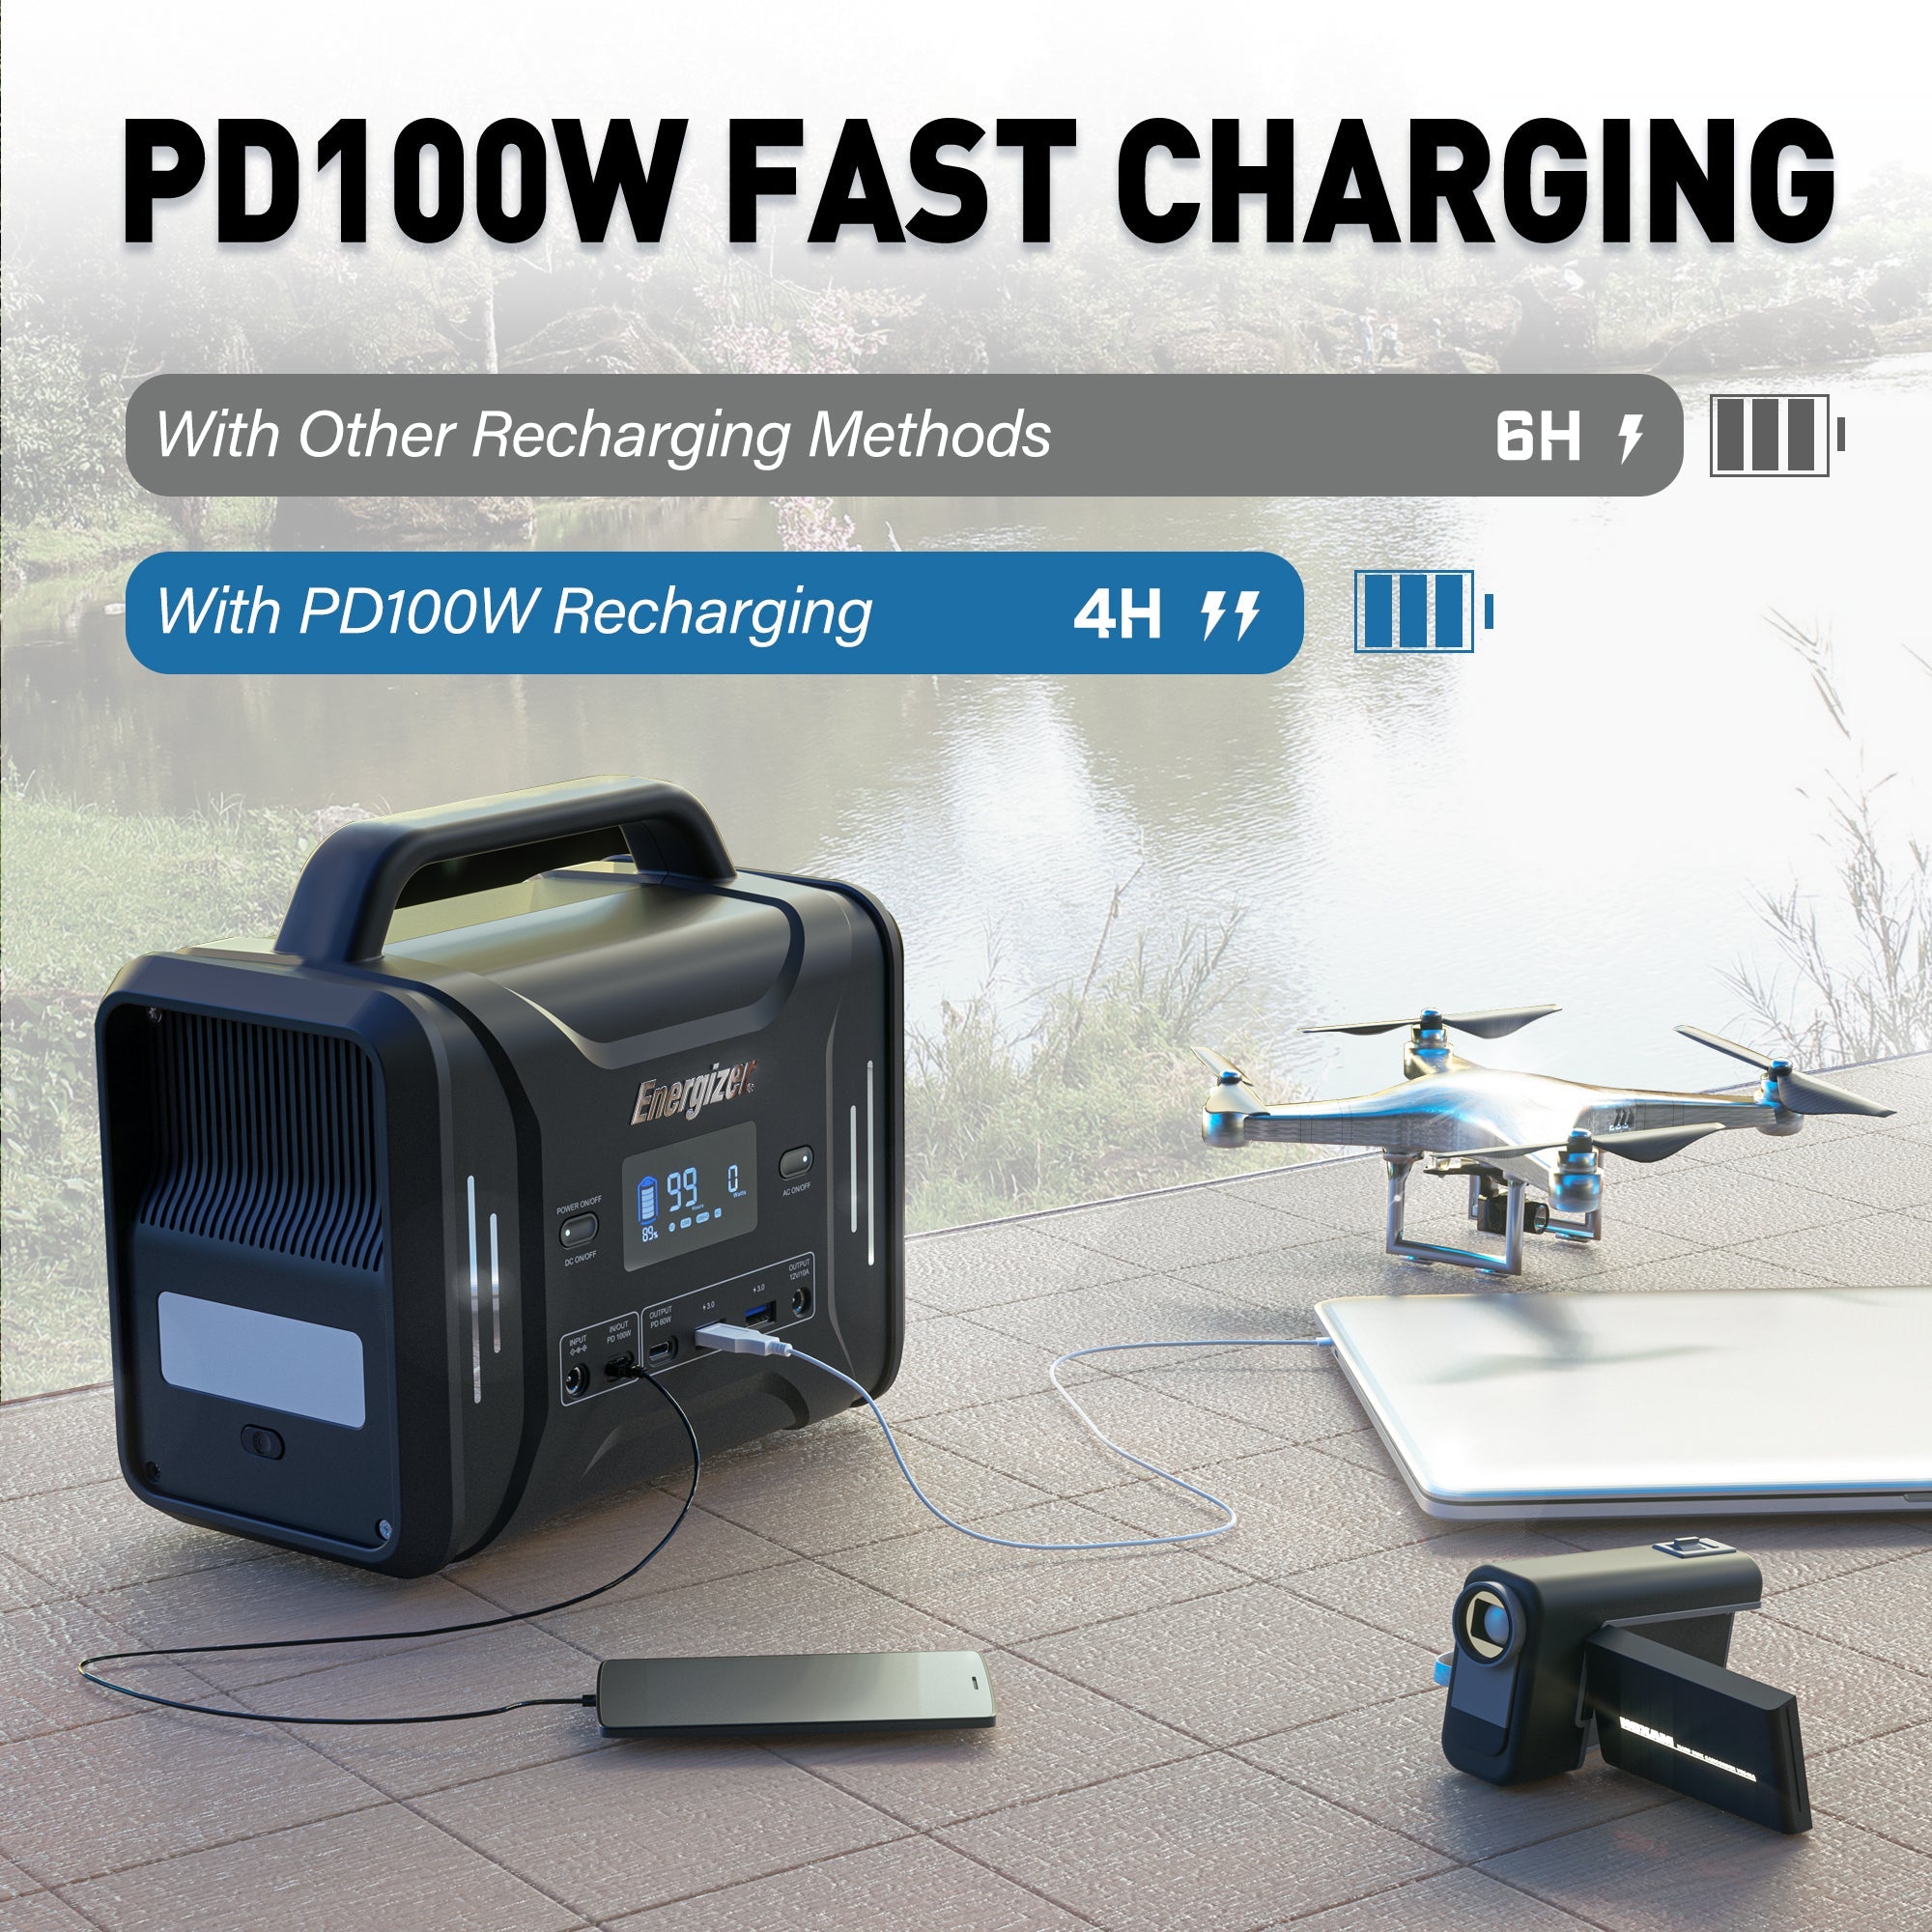 Energizer PPS320 with PD100W fast charging